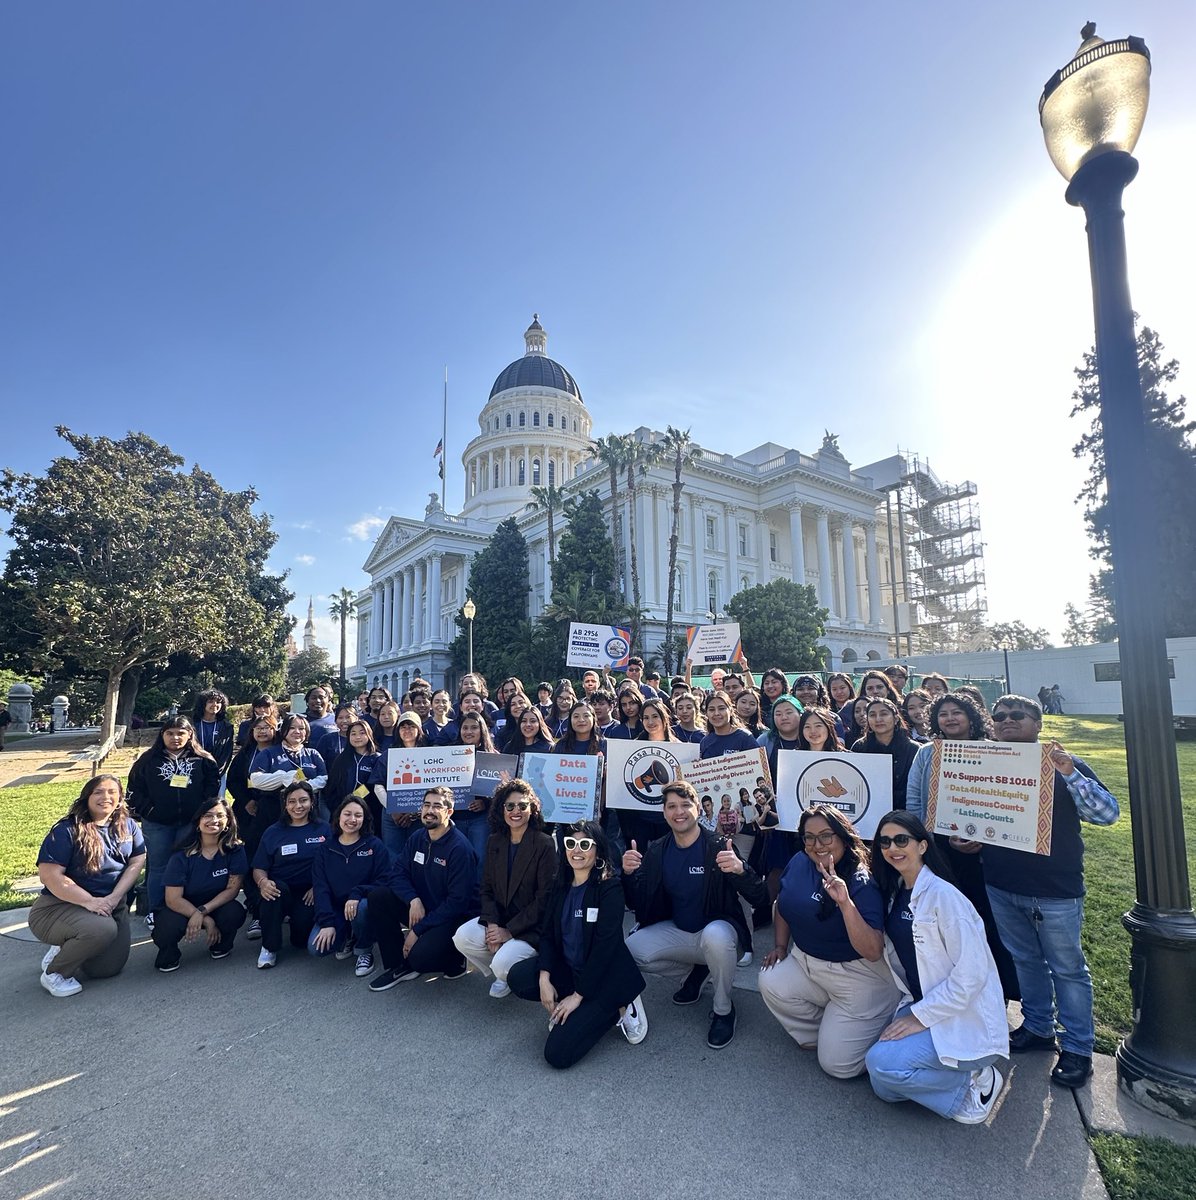 80+ Latine and Indigenous community leaders and advocates in Sacramento for our Day at the Capitol! Thank you for sharing your stories and making your voices heard 👏🏽🧡 #LCHCDaC #HealthEquity